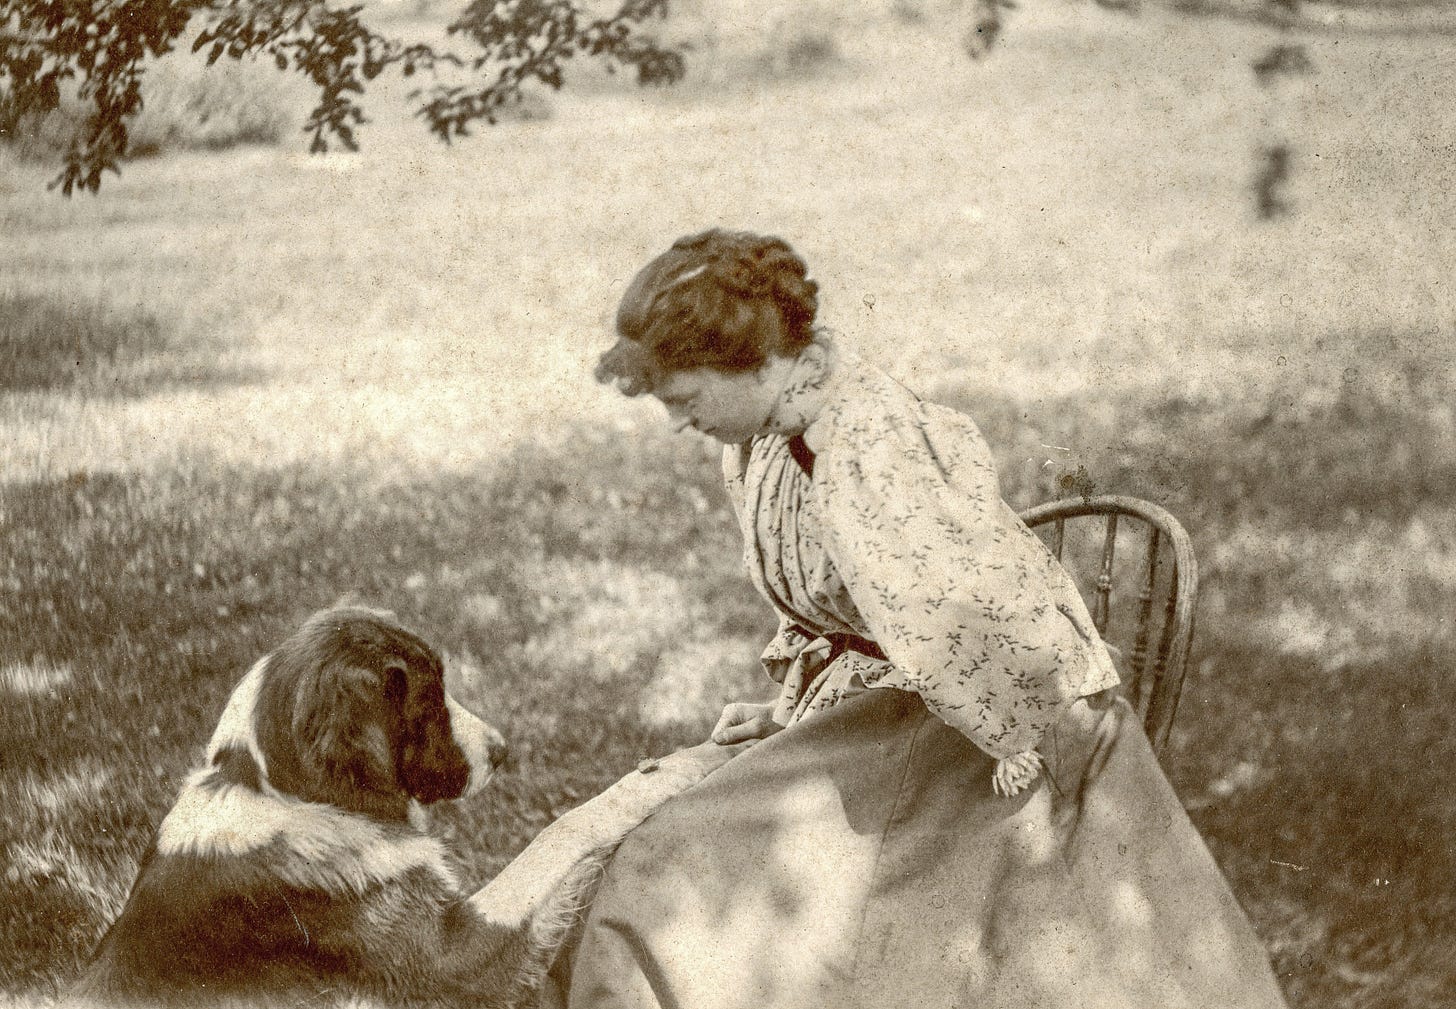 Mary Jane Marshall and her dog in 1897